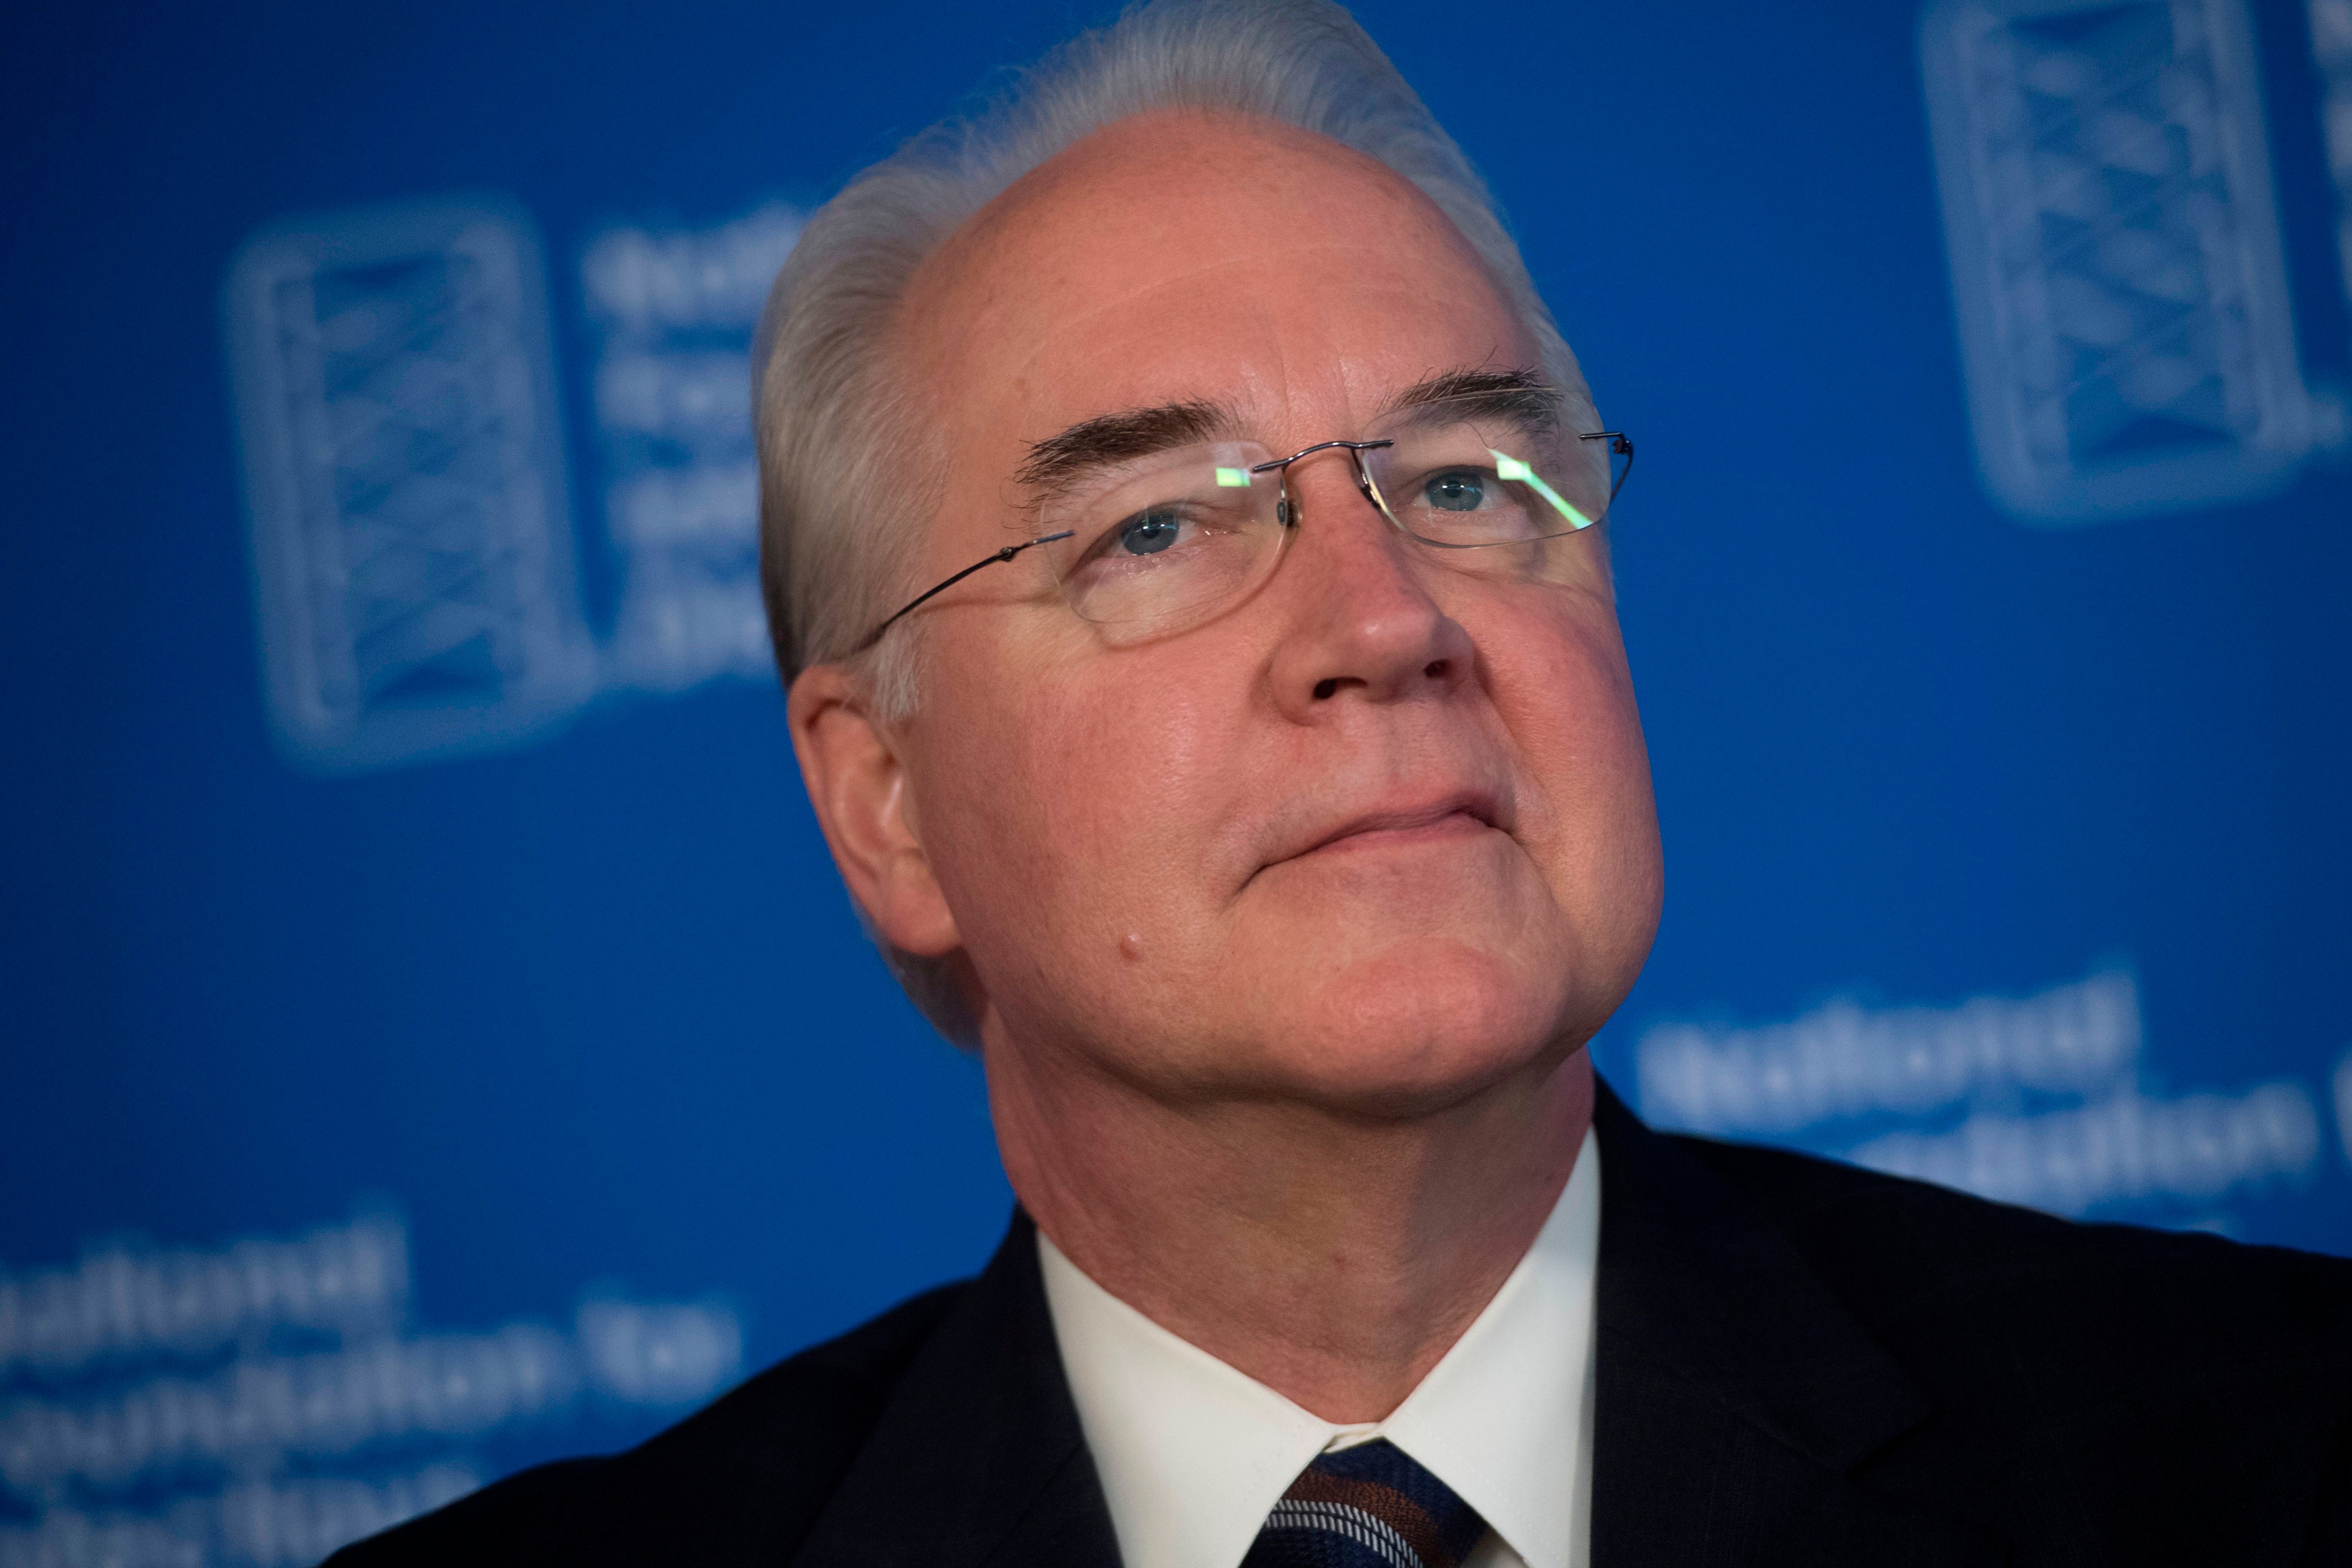 US Secretary of Health and Human Services Tom Price attends a press conference about influenza prevention for the upcoming flu season at the National Press Club in Washington, DC, September 28, 2017. (Saul Loeb—AFP/Getty Images)